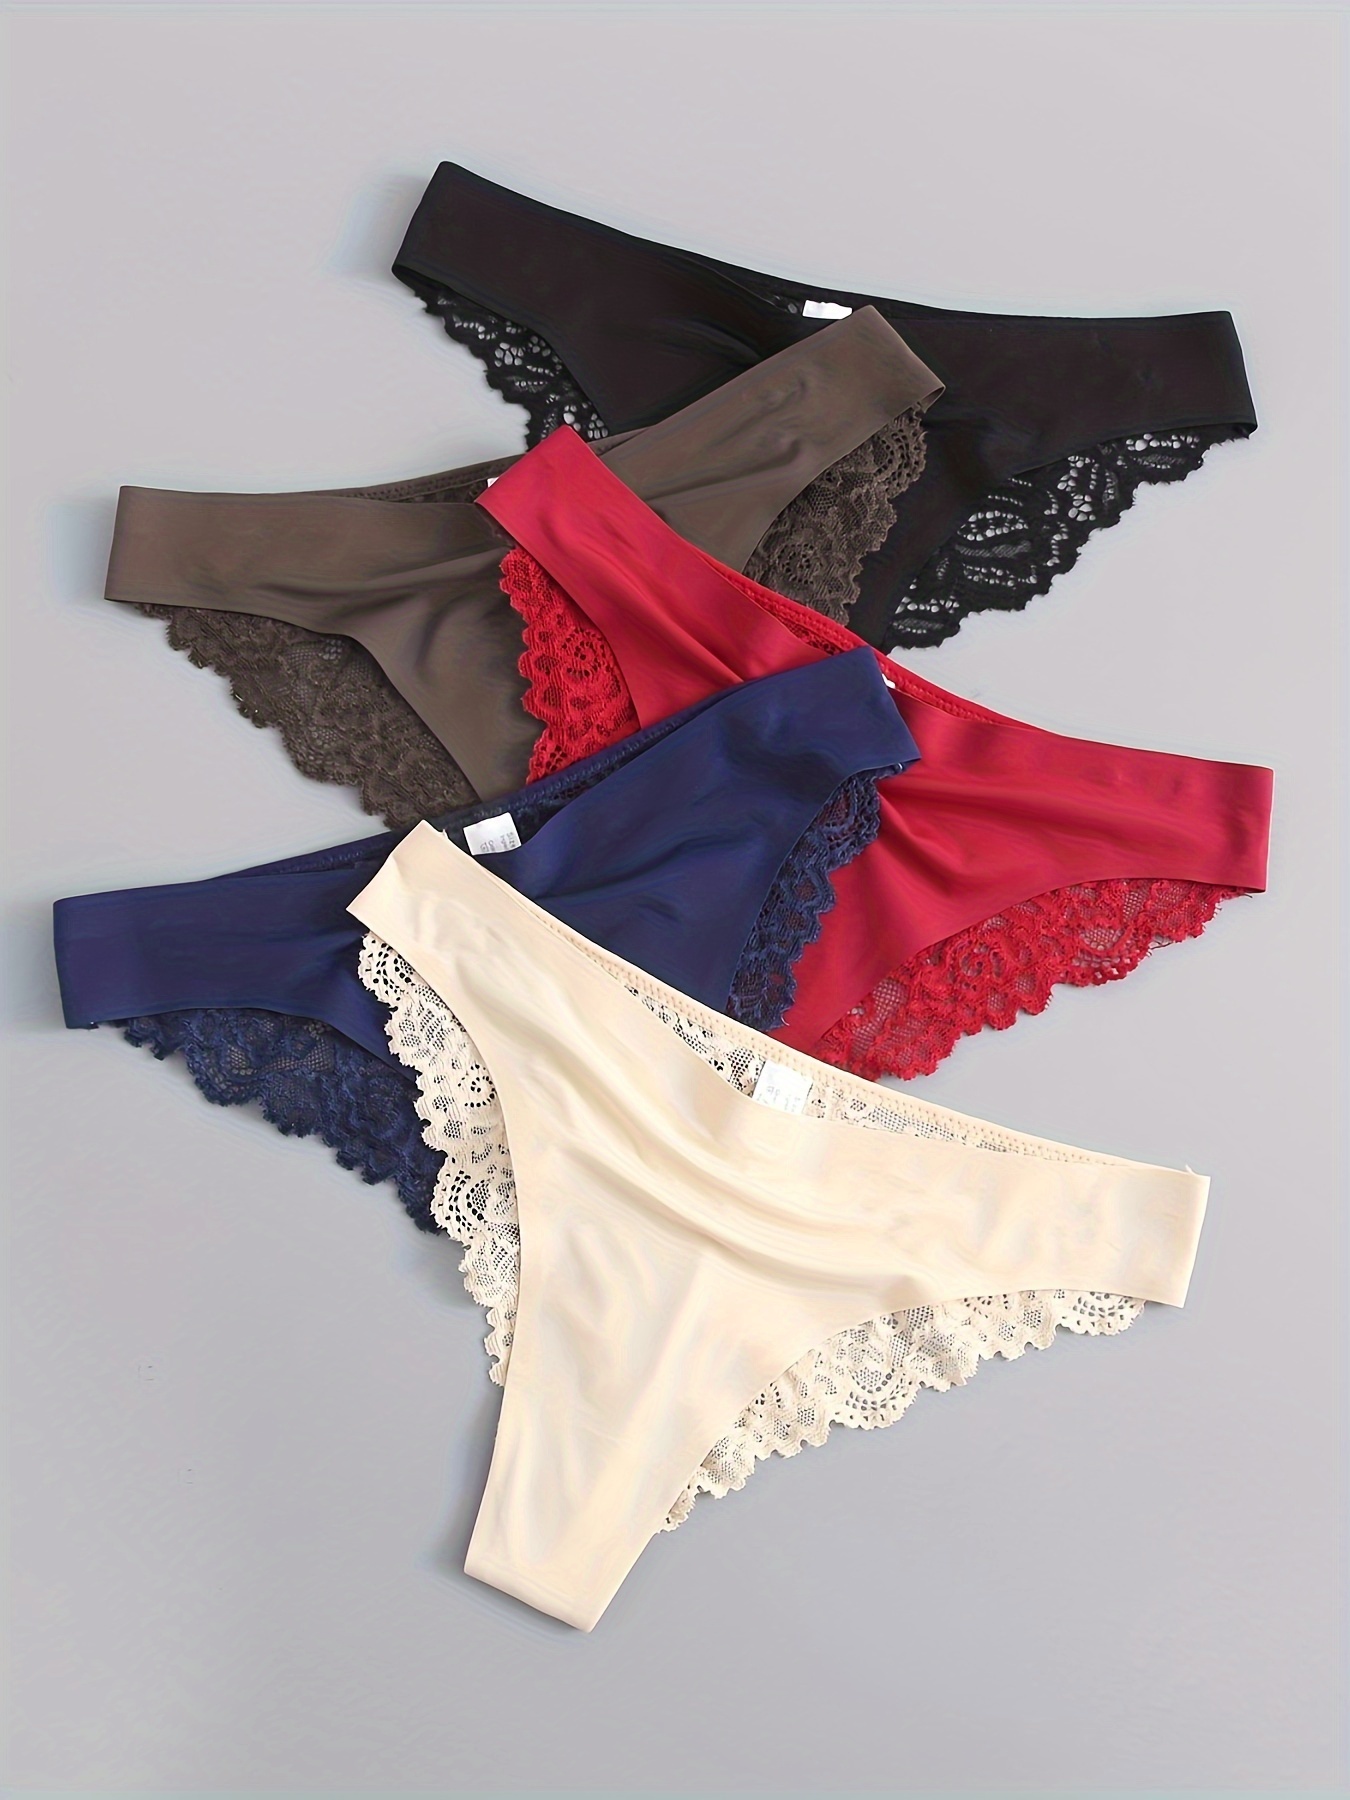 5pcs/Pack Women's Low Waist Lace Thong Underwear Soft And Breathable